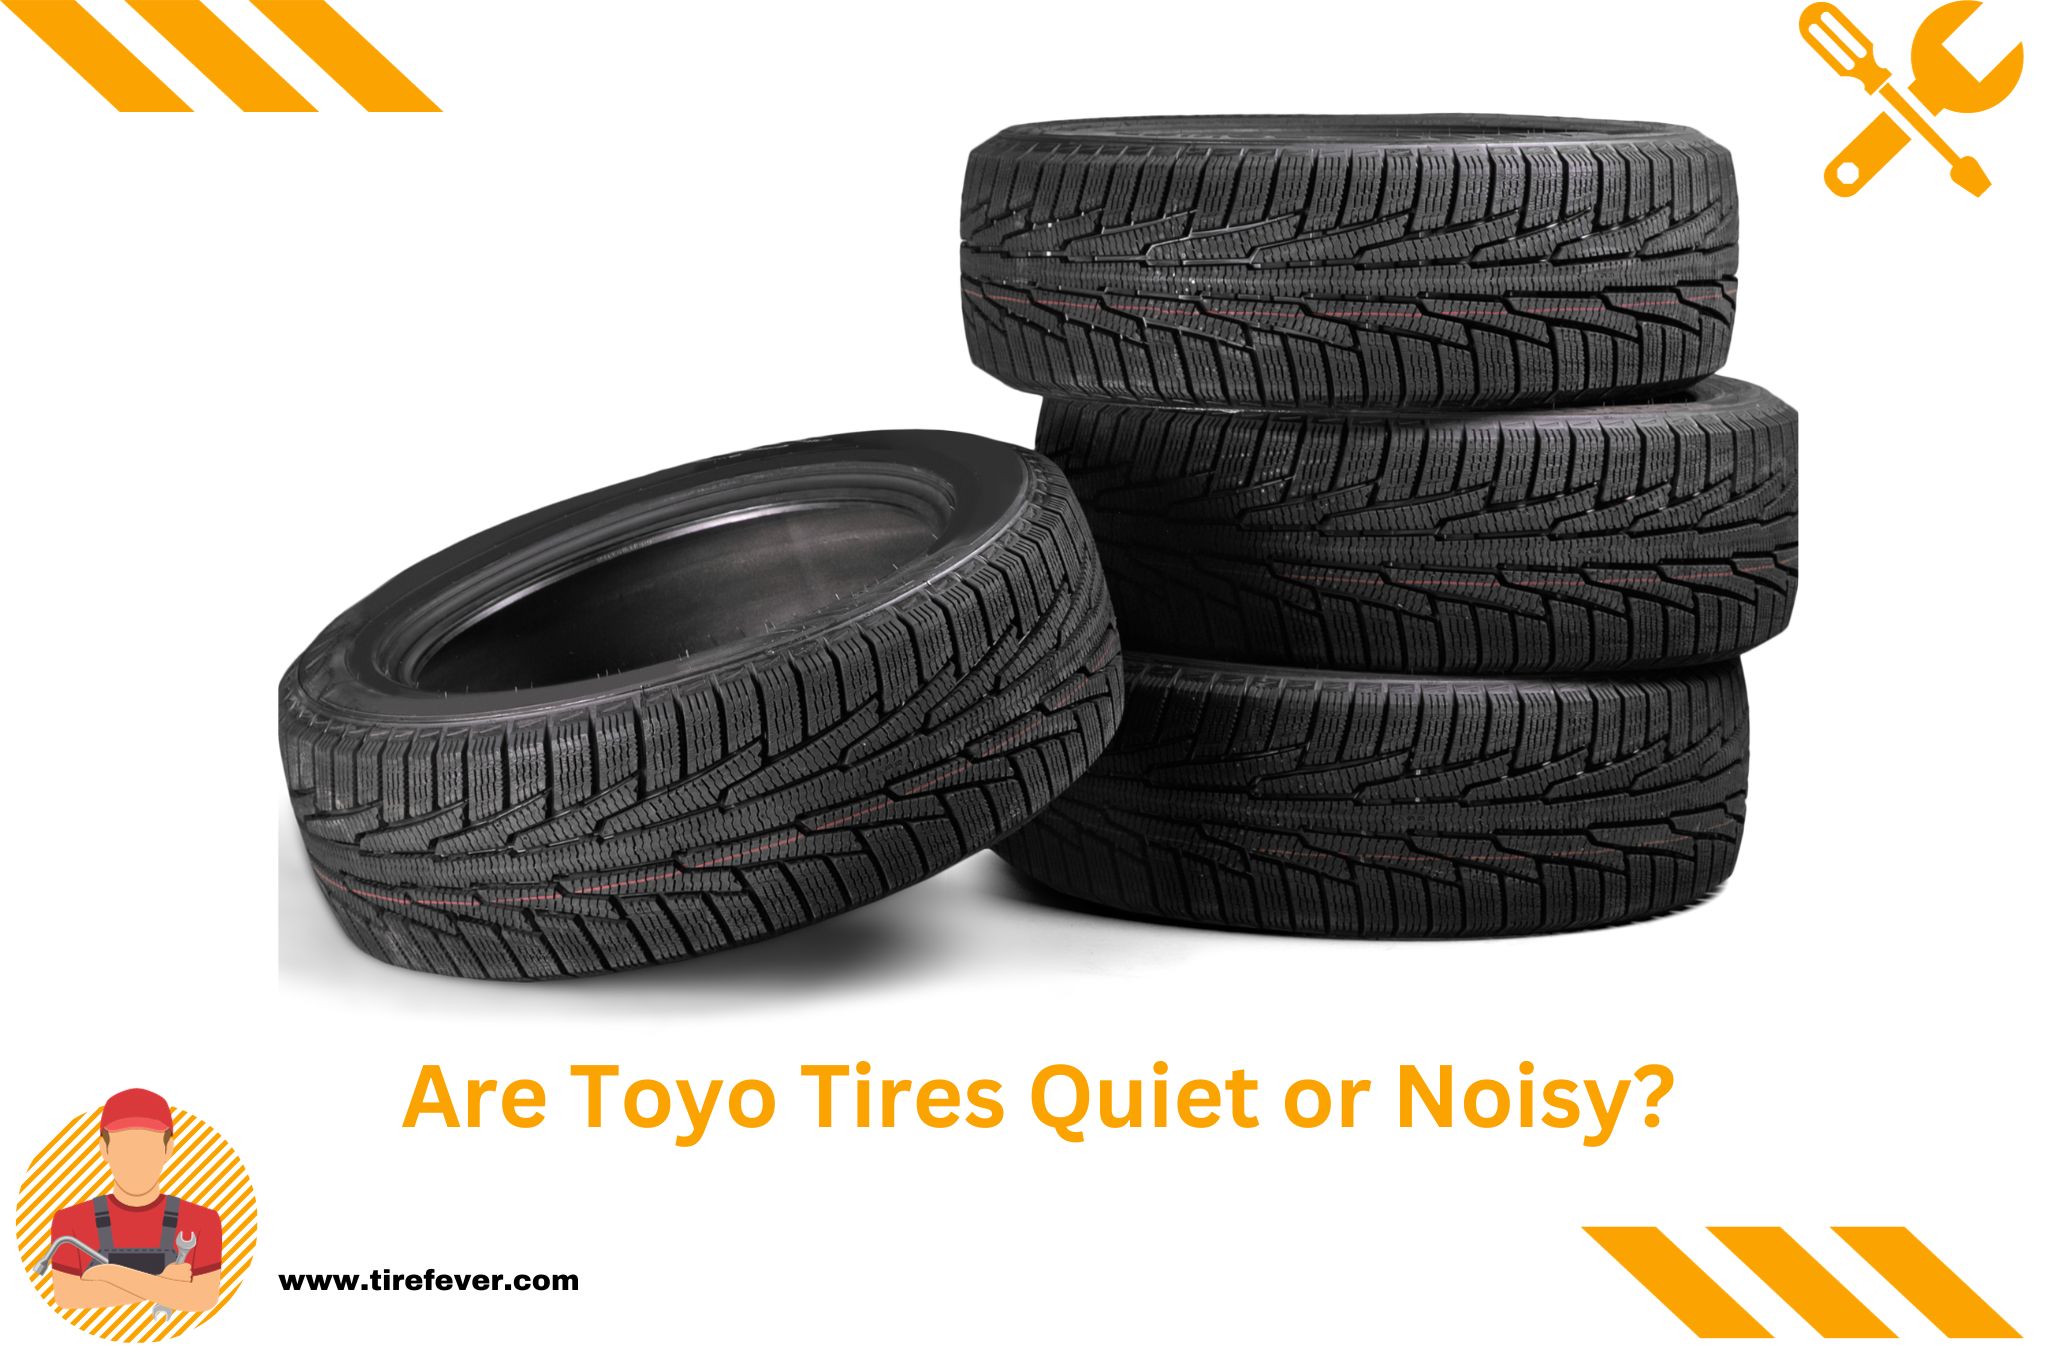 Are Toyo Tires Quiet or Noisy?